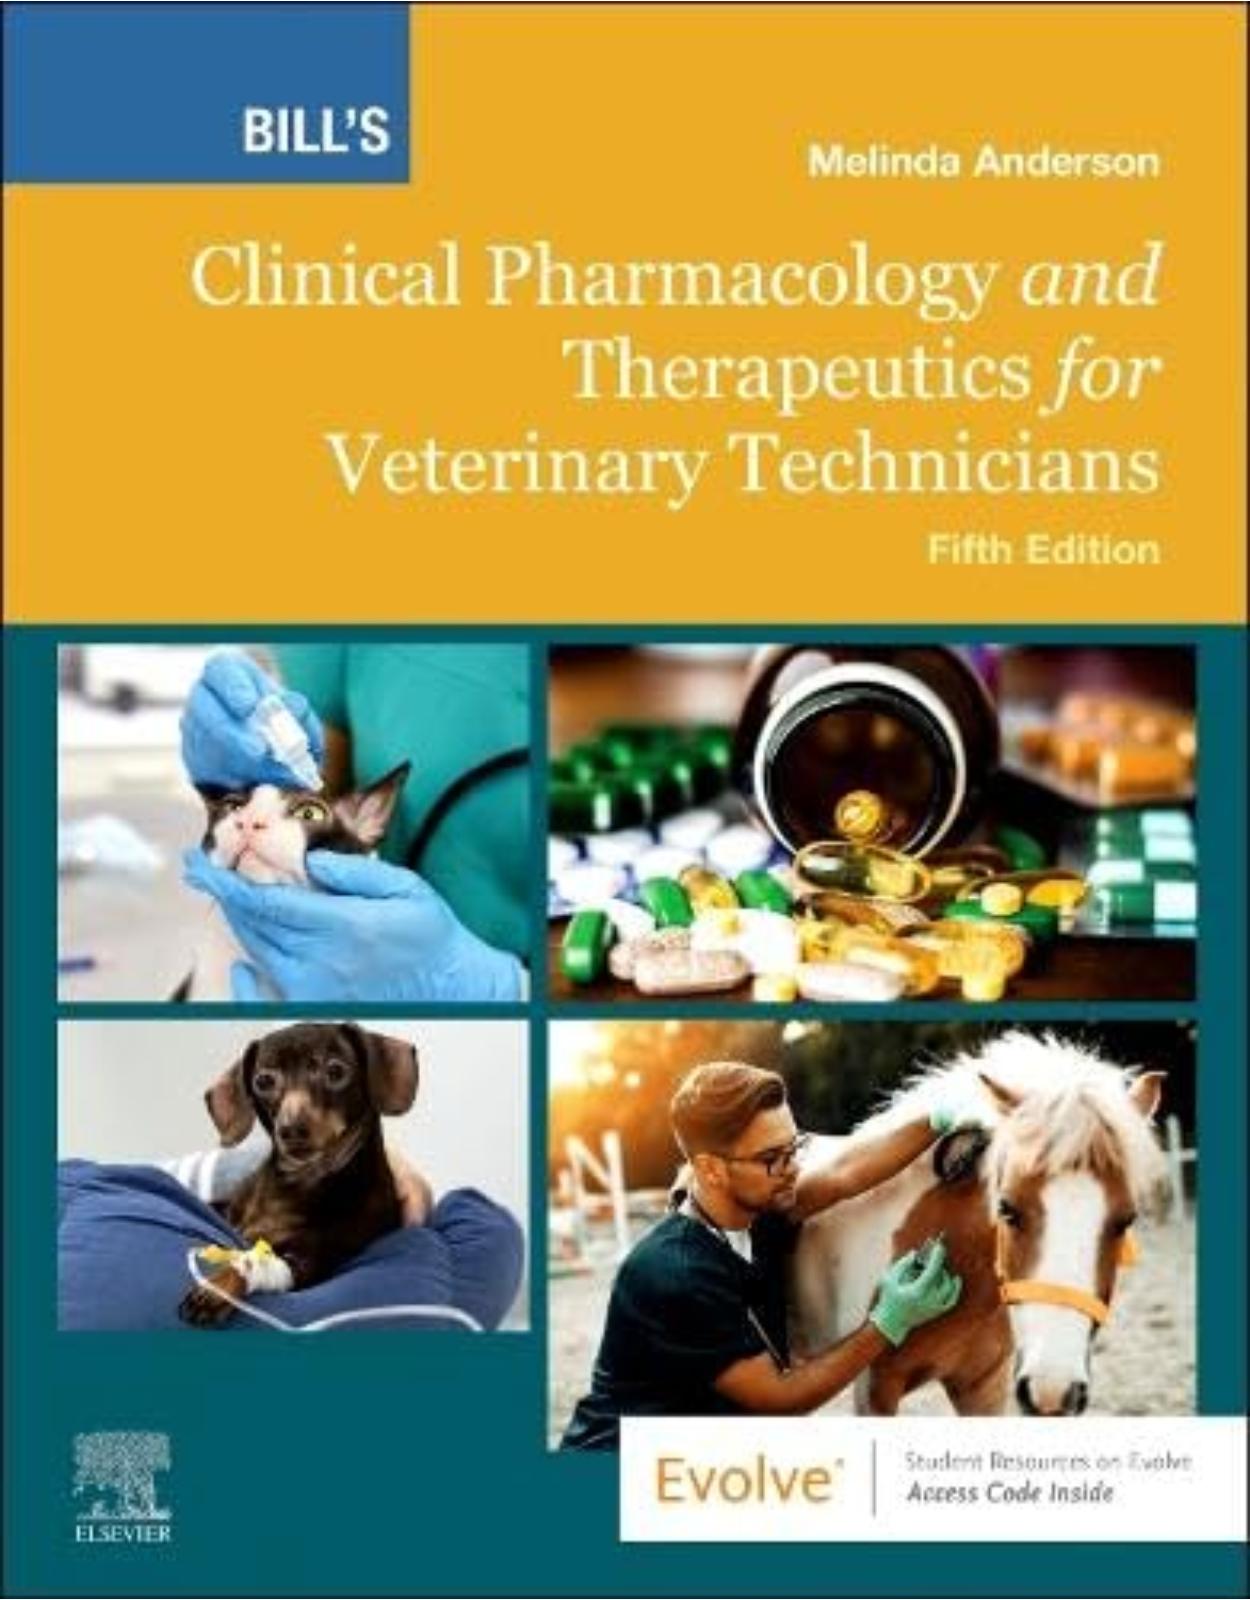 Bill’s Clinical Pharmacology and Therapeutics for Veterinary Technicians